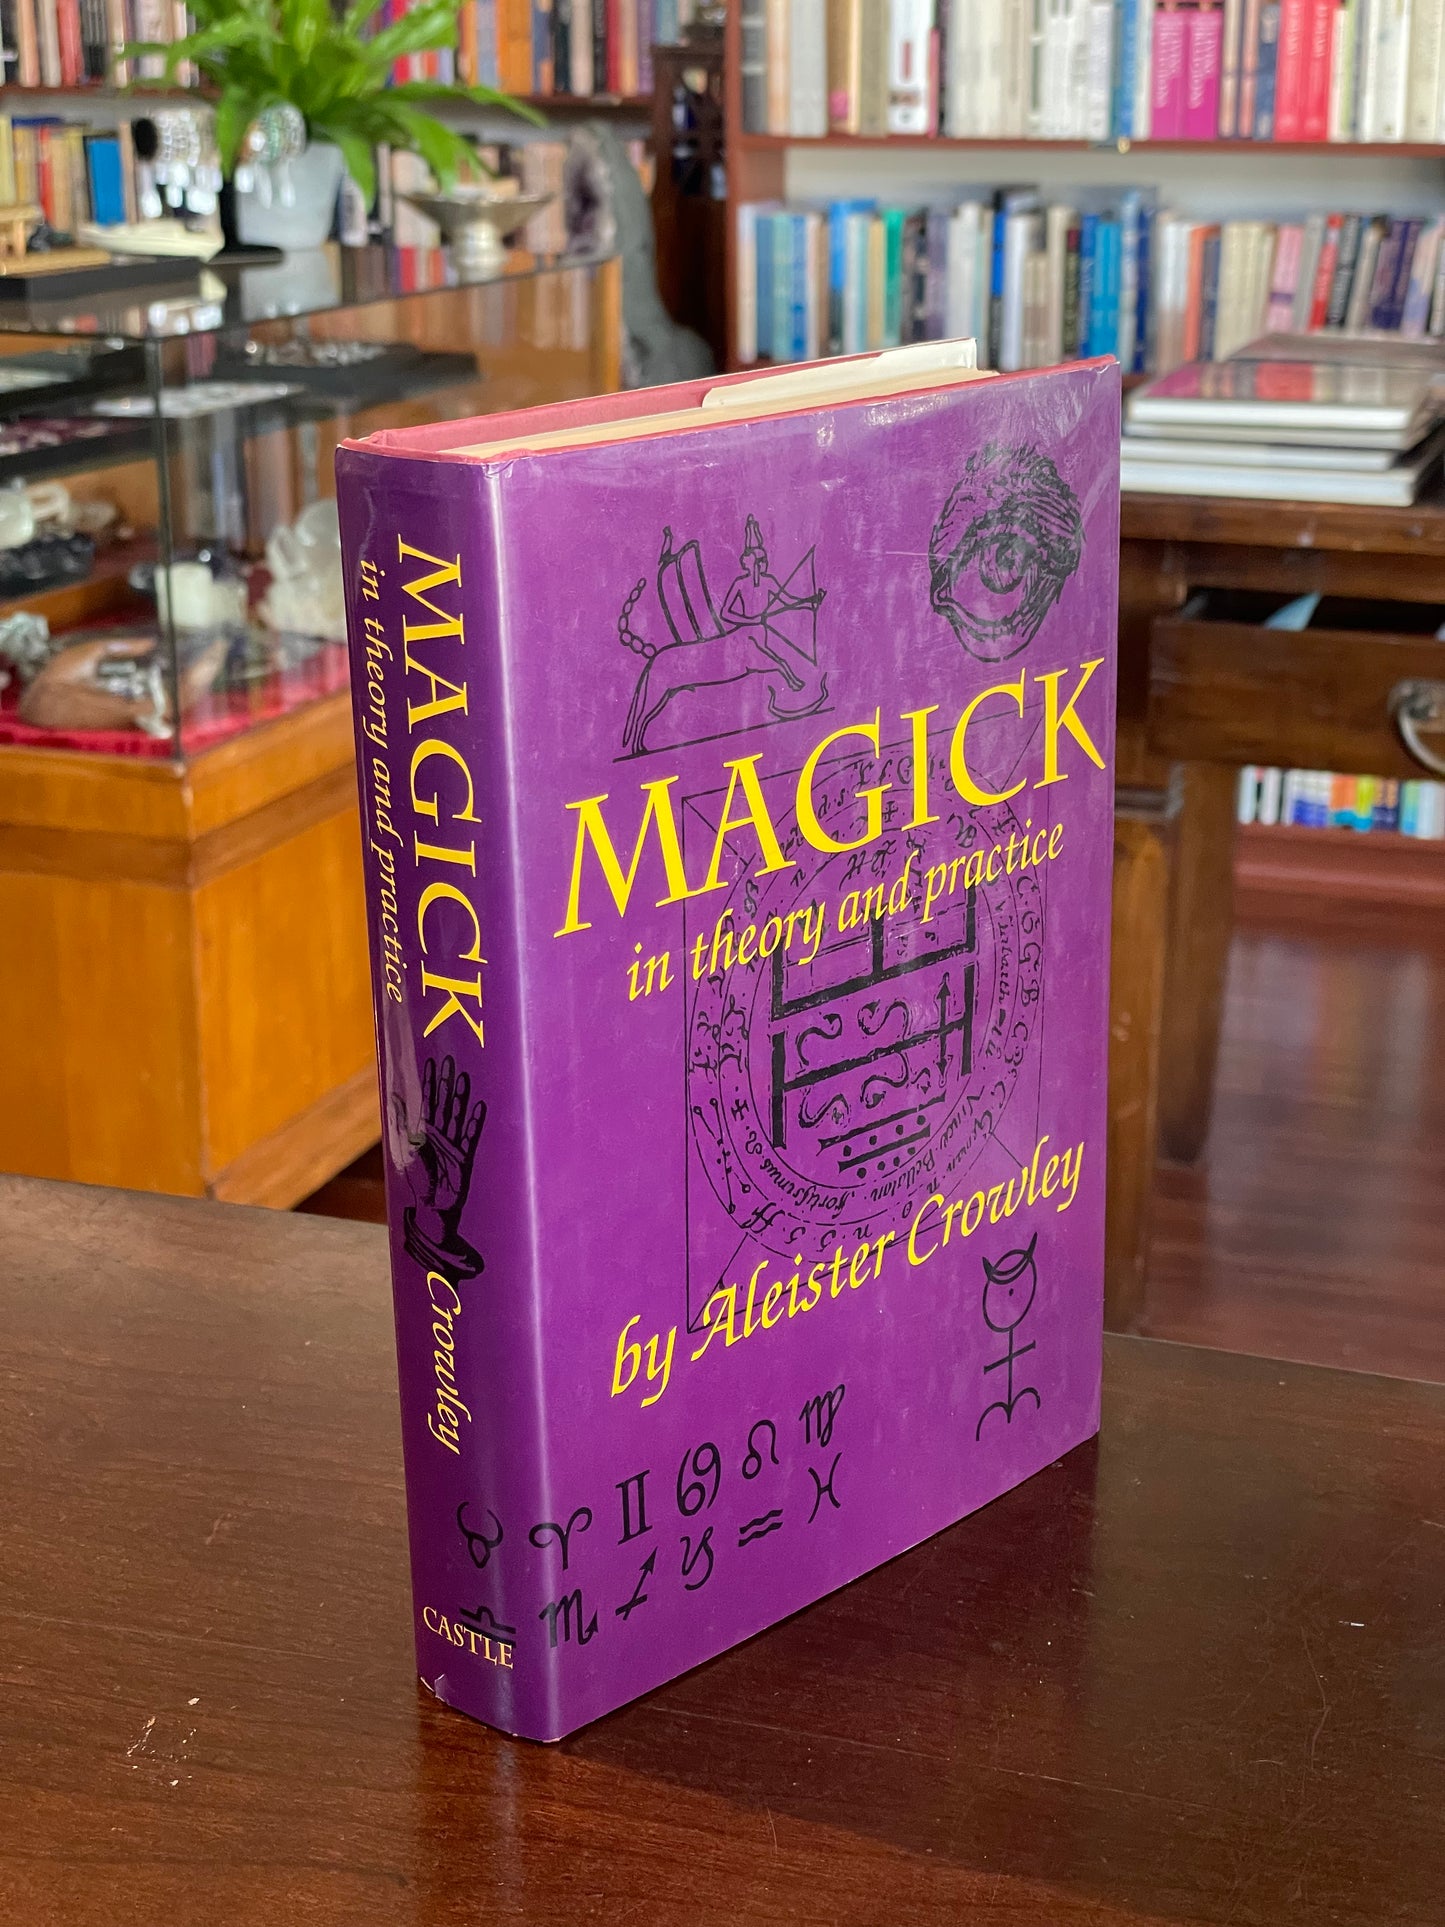 Magick In Theory And Practice by Aleister Crowley l